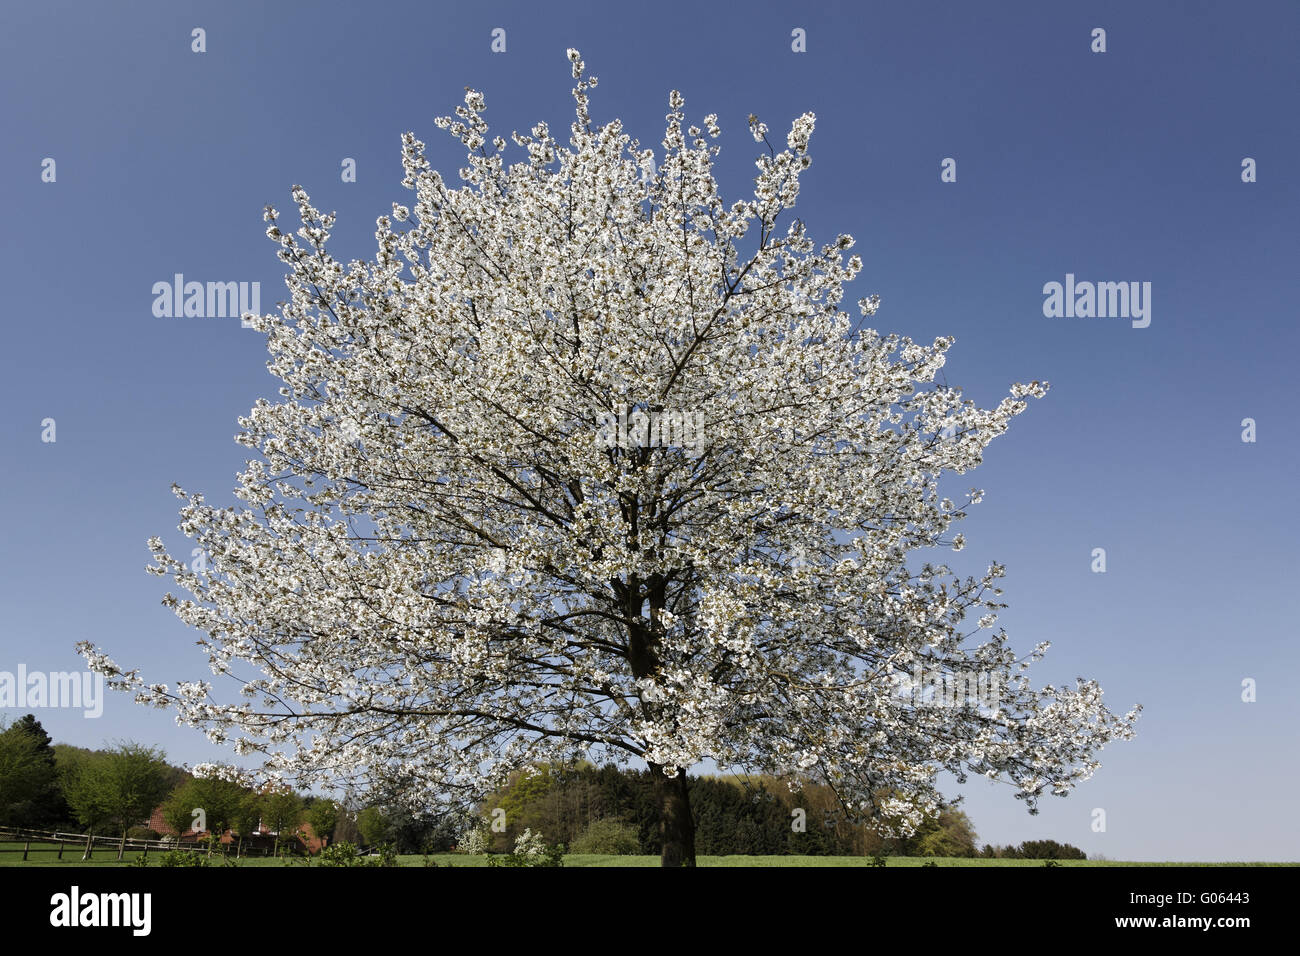 Cherry blossoms in Hagen in Lower Saxony, Germany Stock Photo